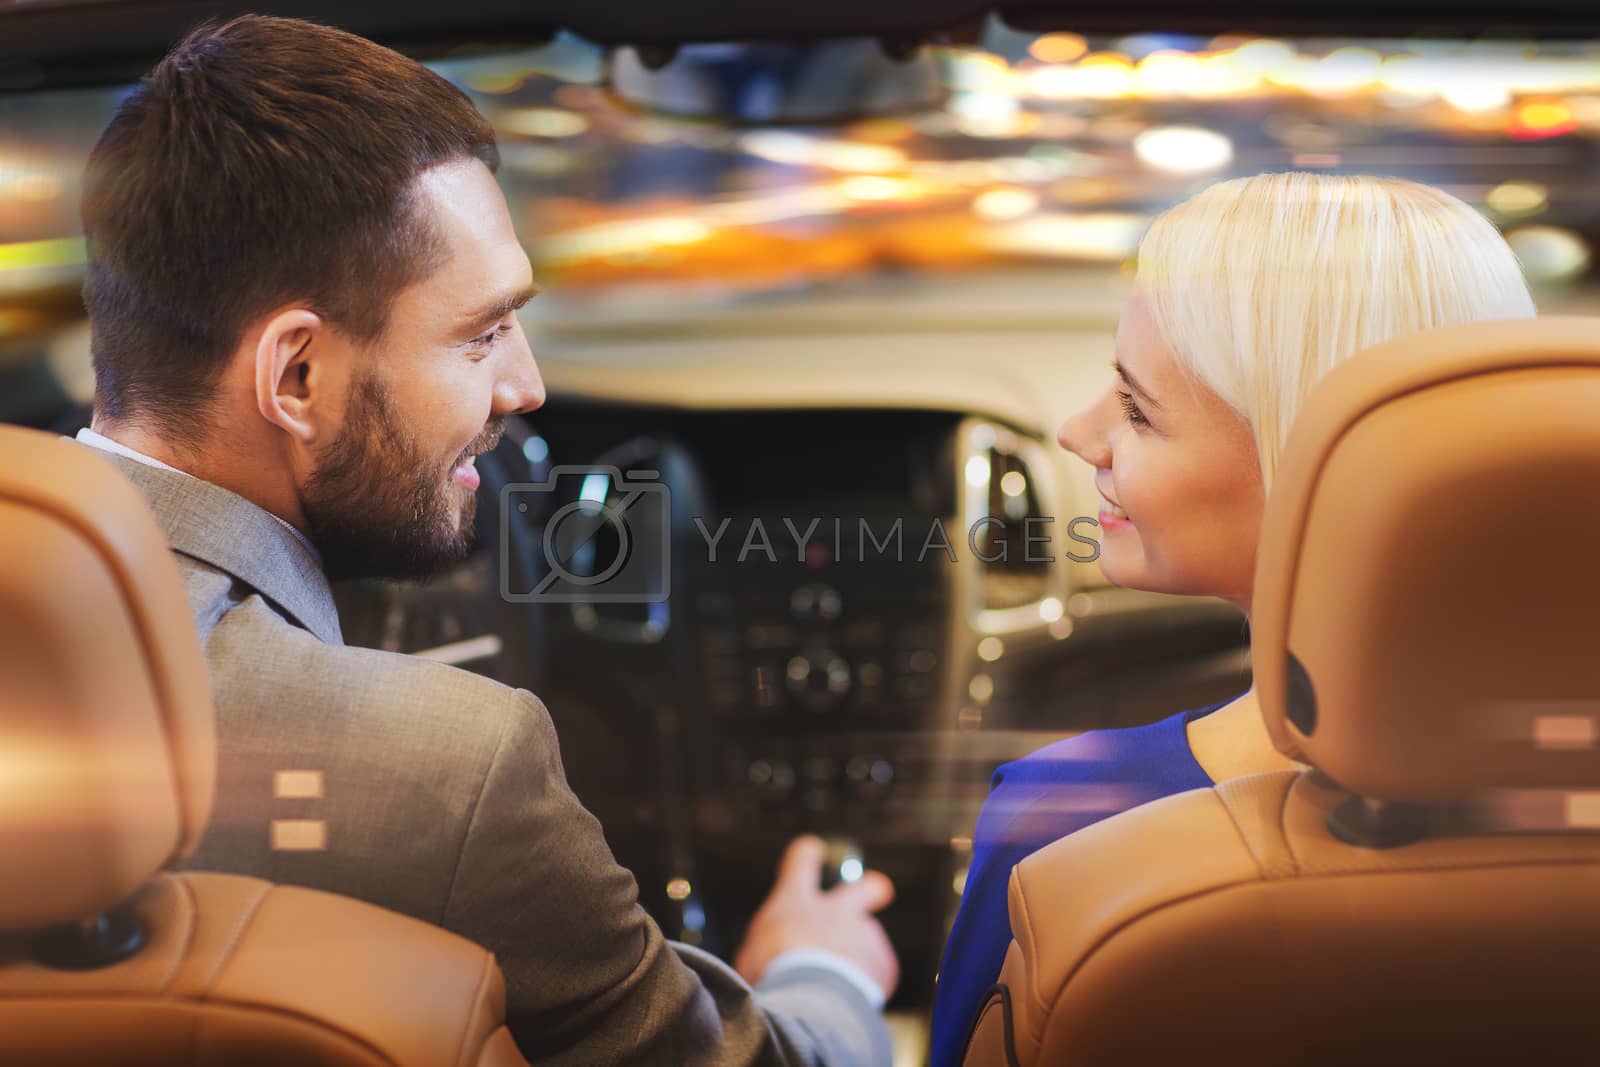 Royalty free image of happy couple driving in car over night city by dolgachov